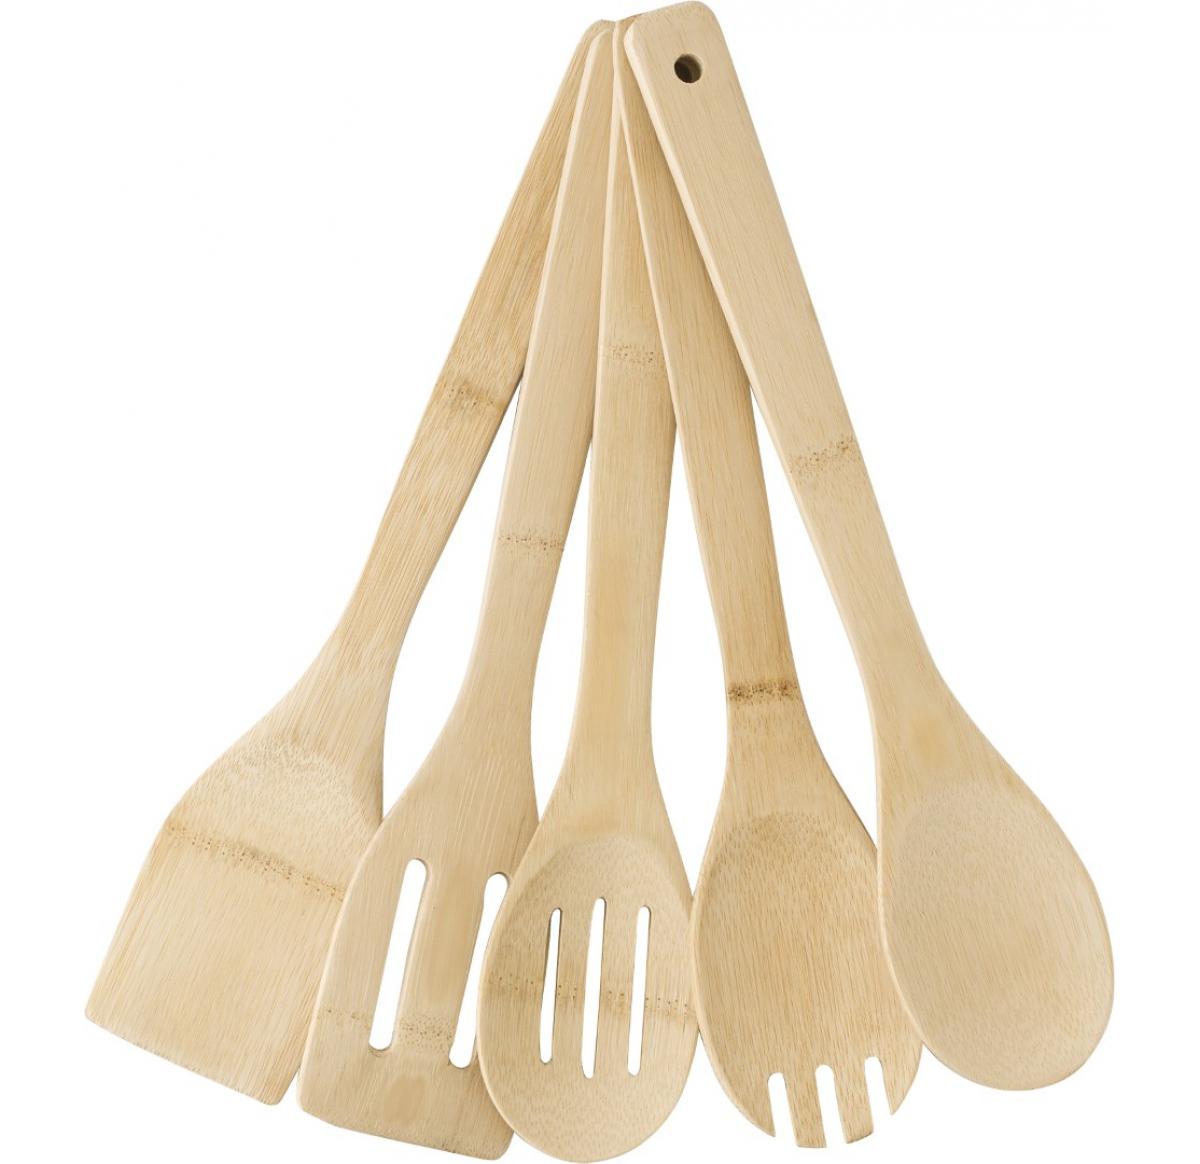 Custom Branded Wooden Spatula Sets Of Five - Bamboo